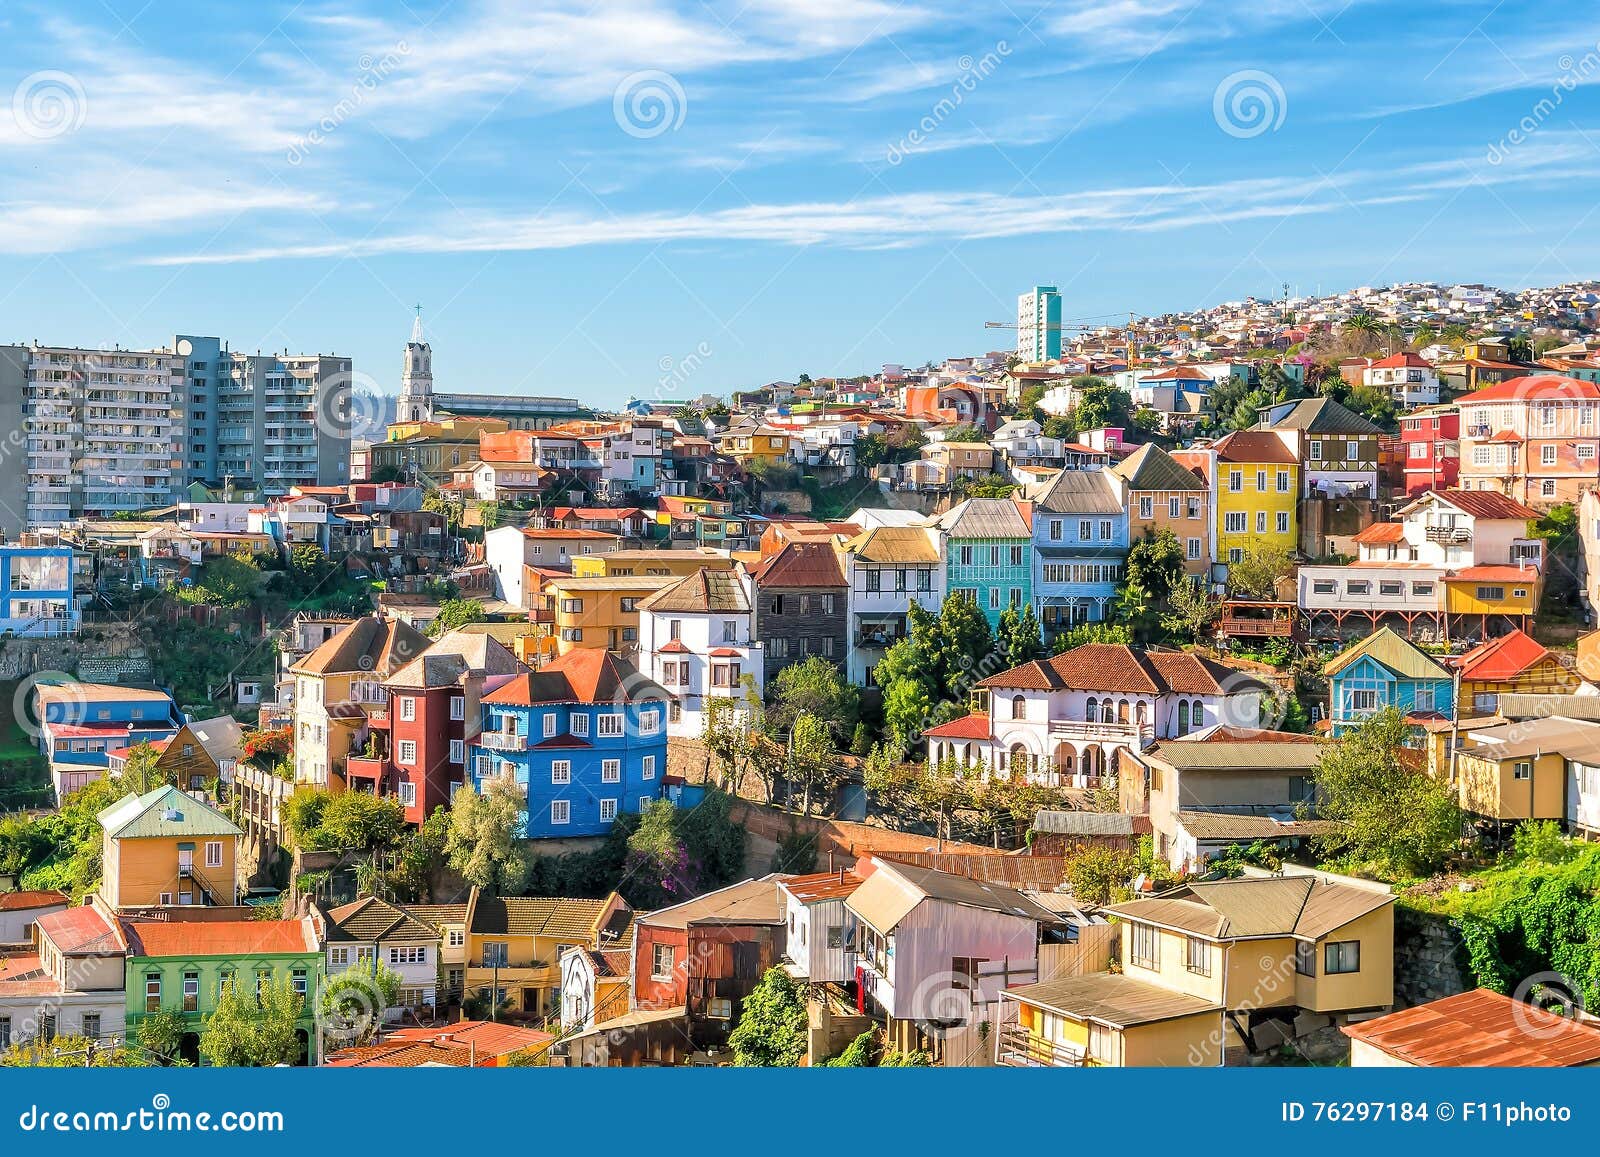 colorful buildings of valparaiso, chile